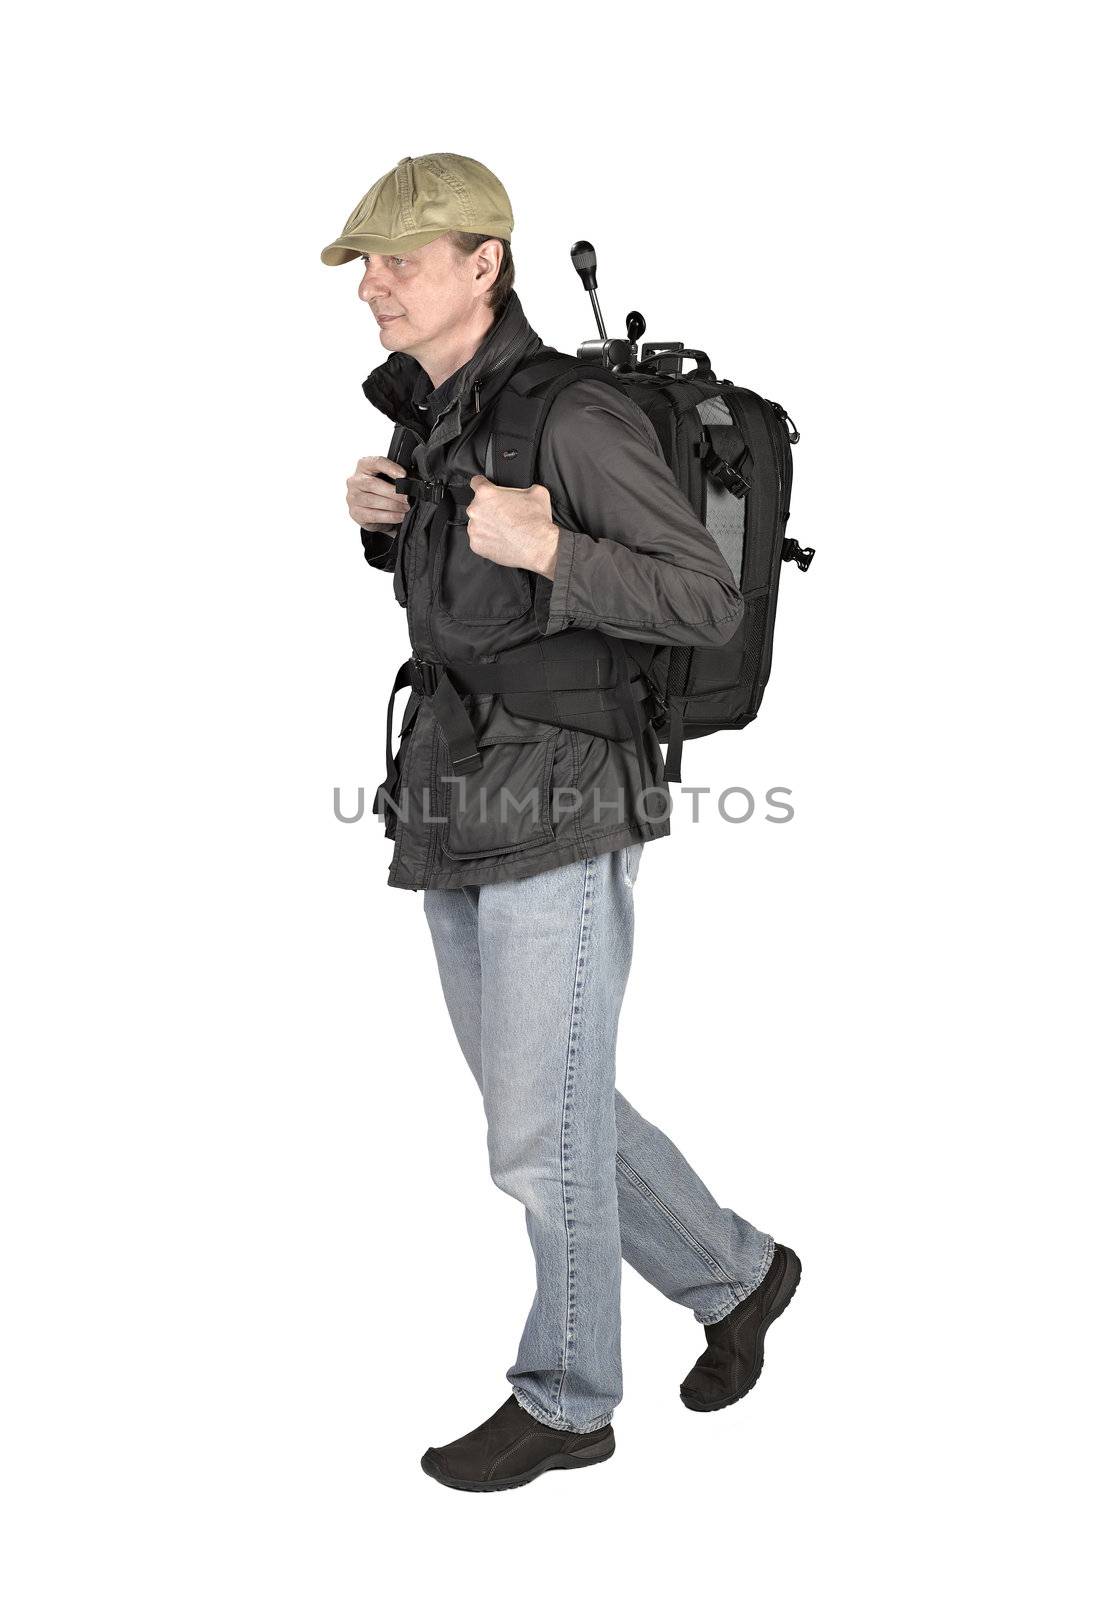 Phtographer hiker, side view on white background